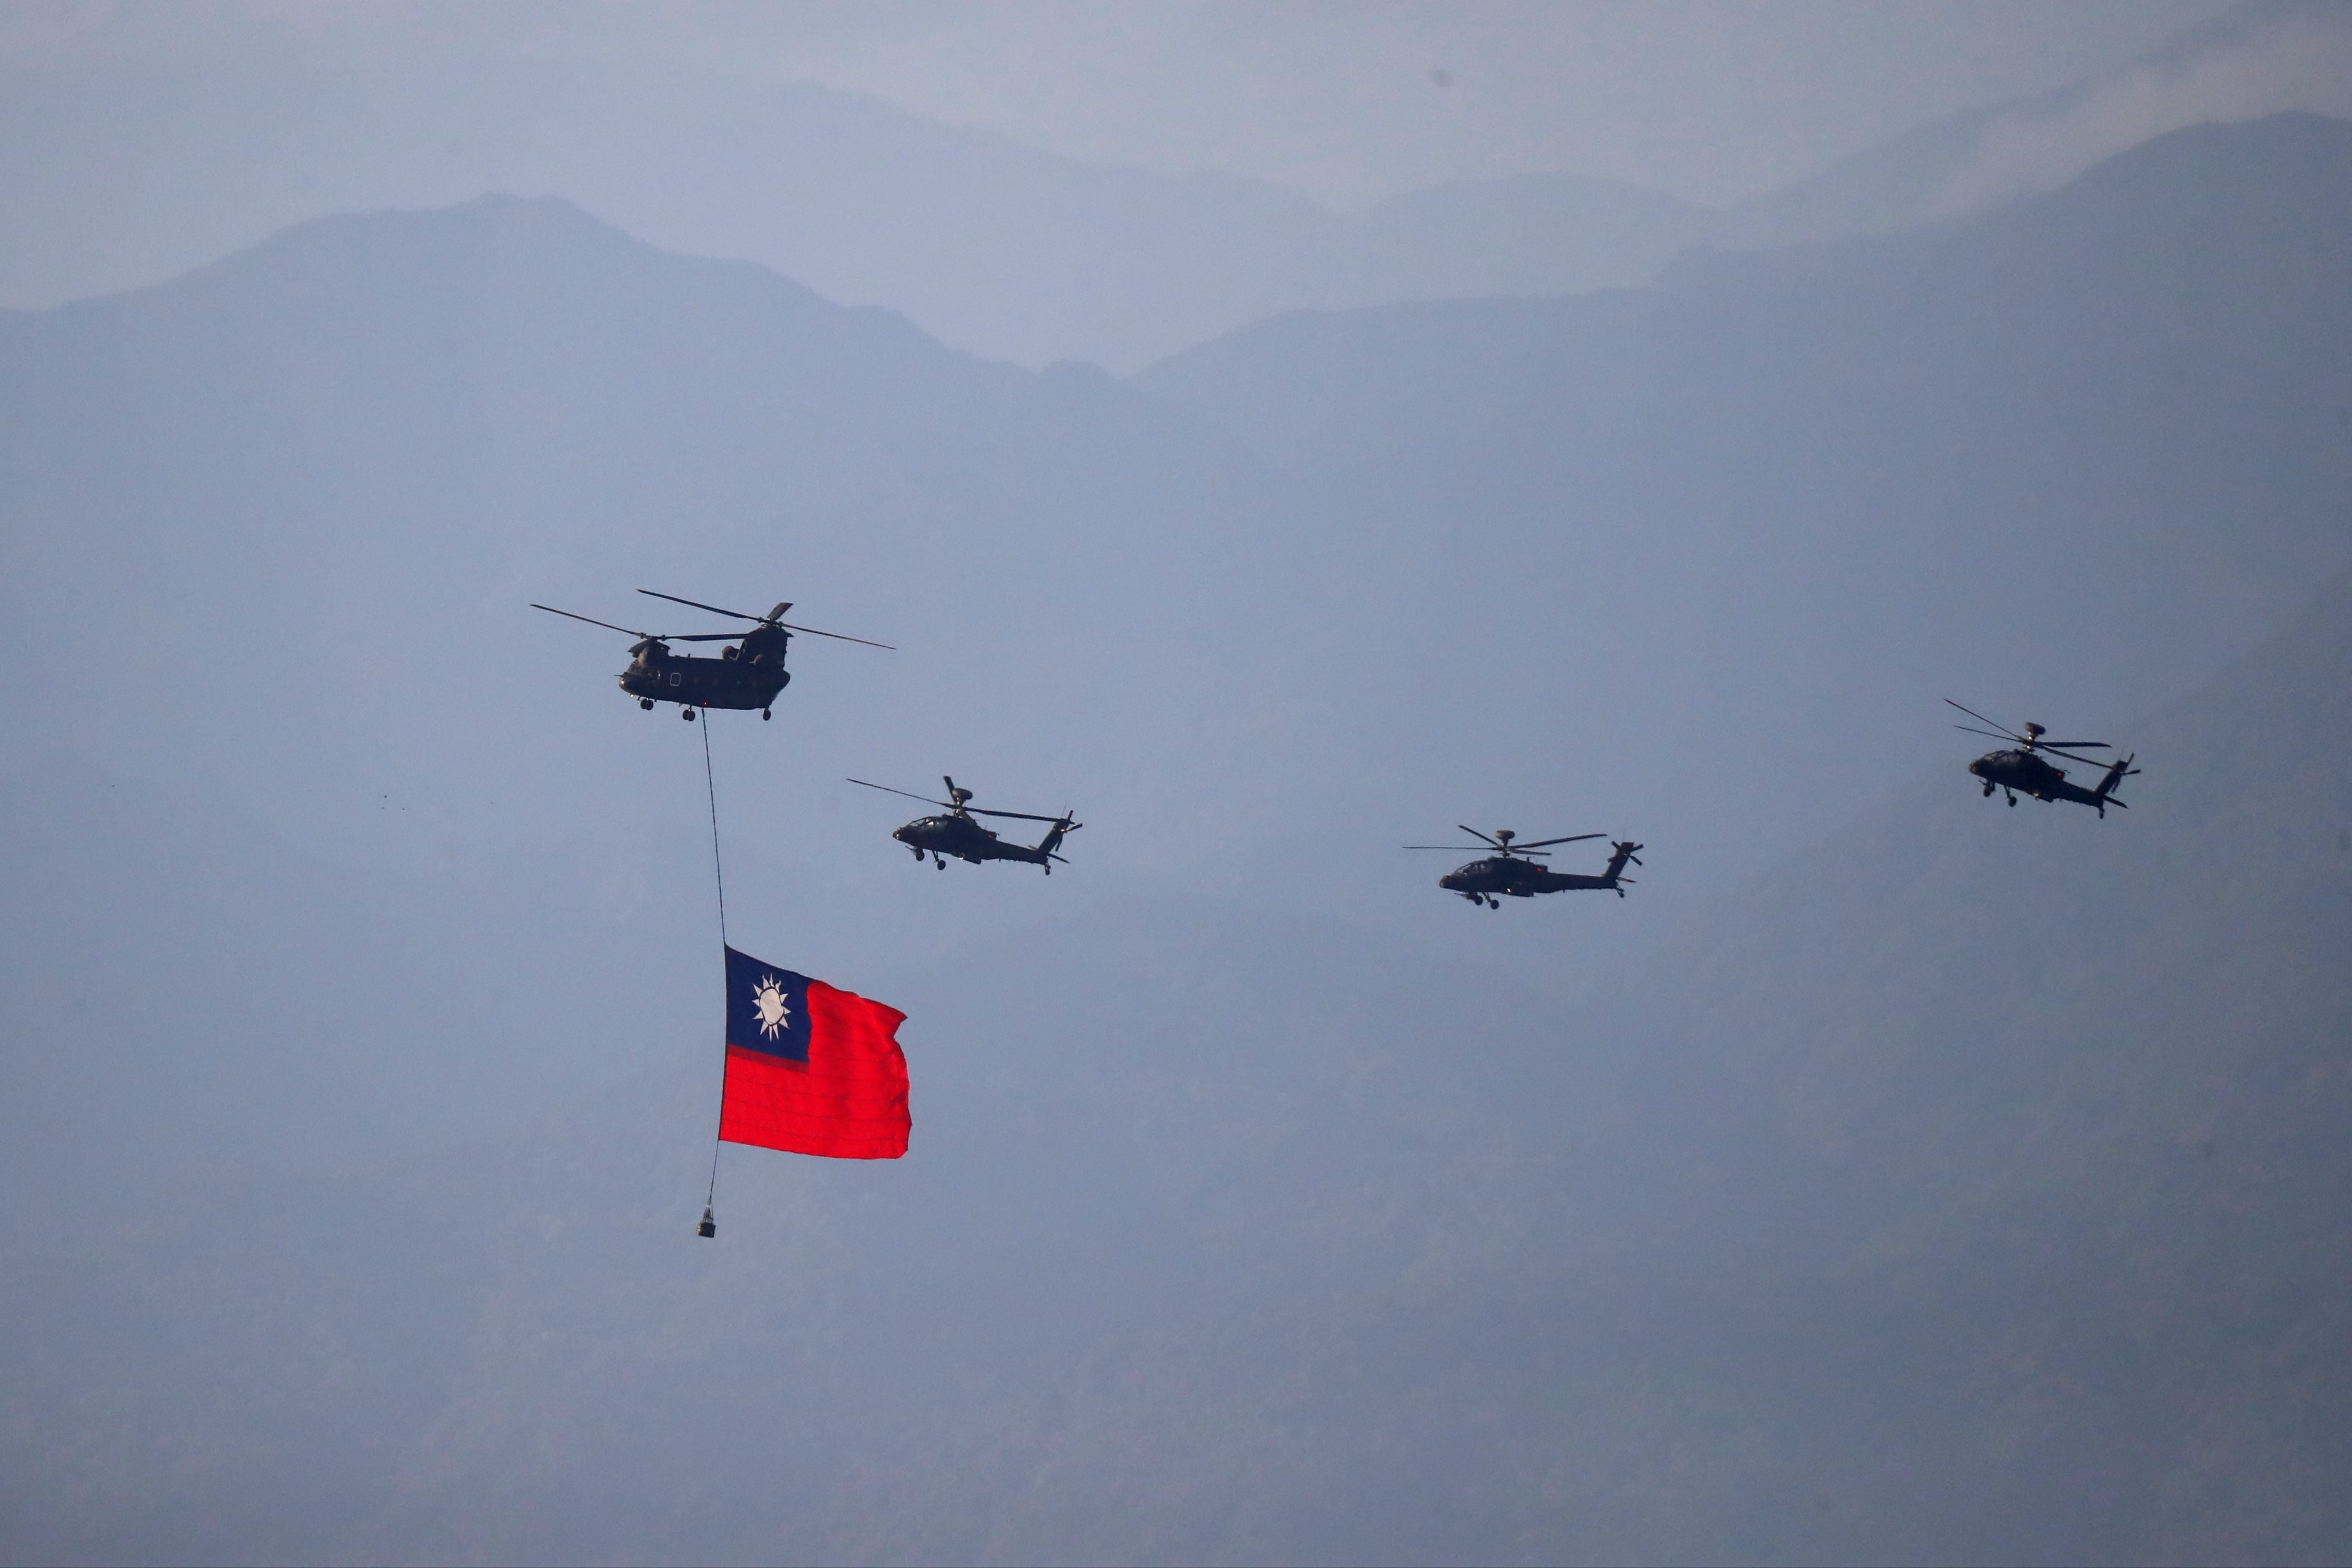 Four military helicopters are seen flying, with the leftmost chopper carrying a Taiwan flag.